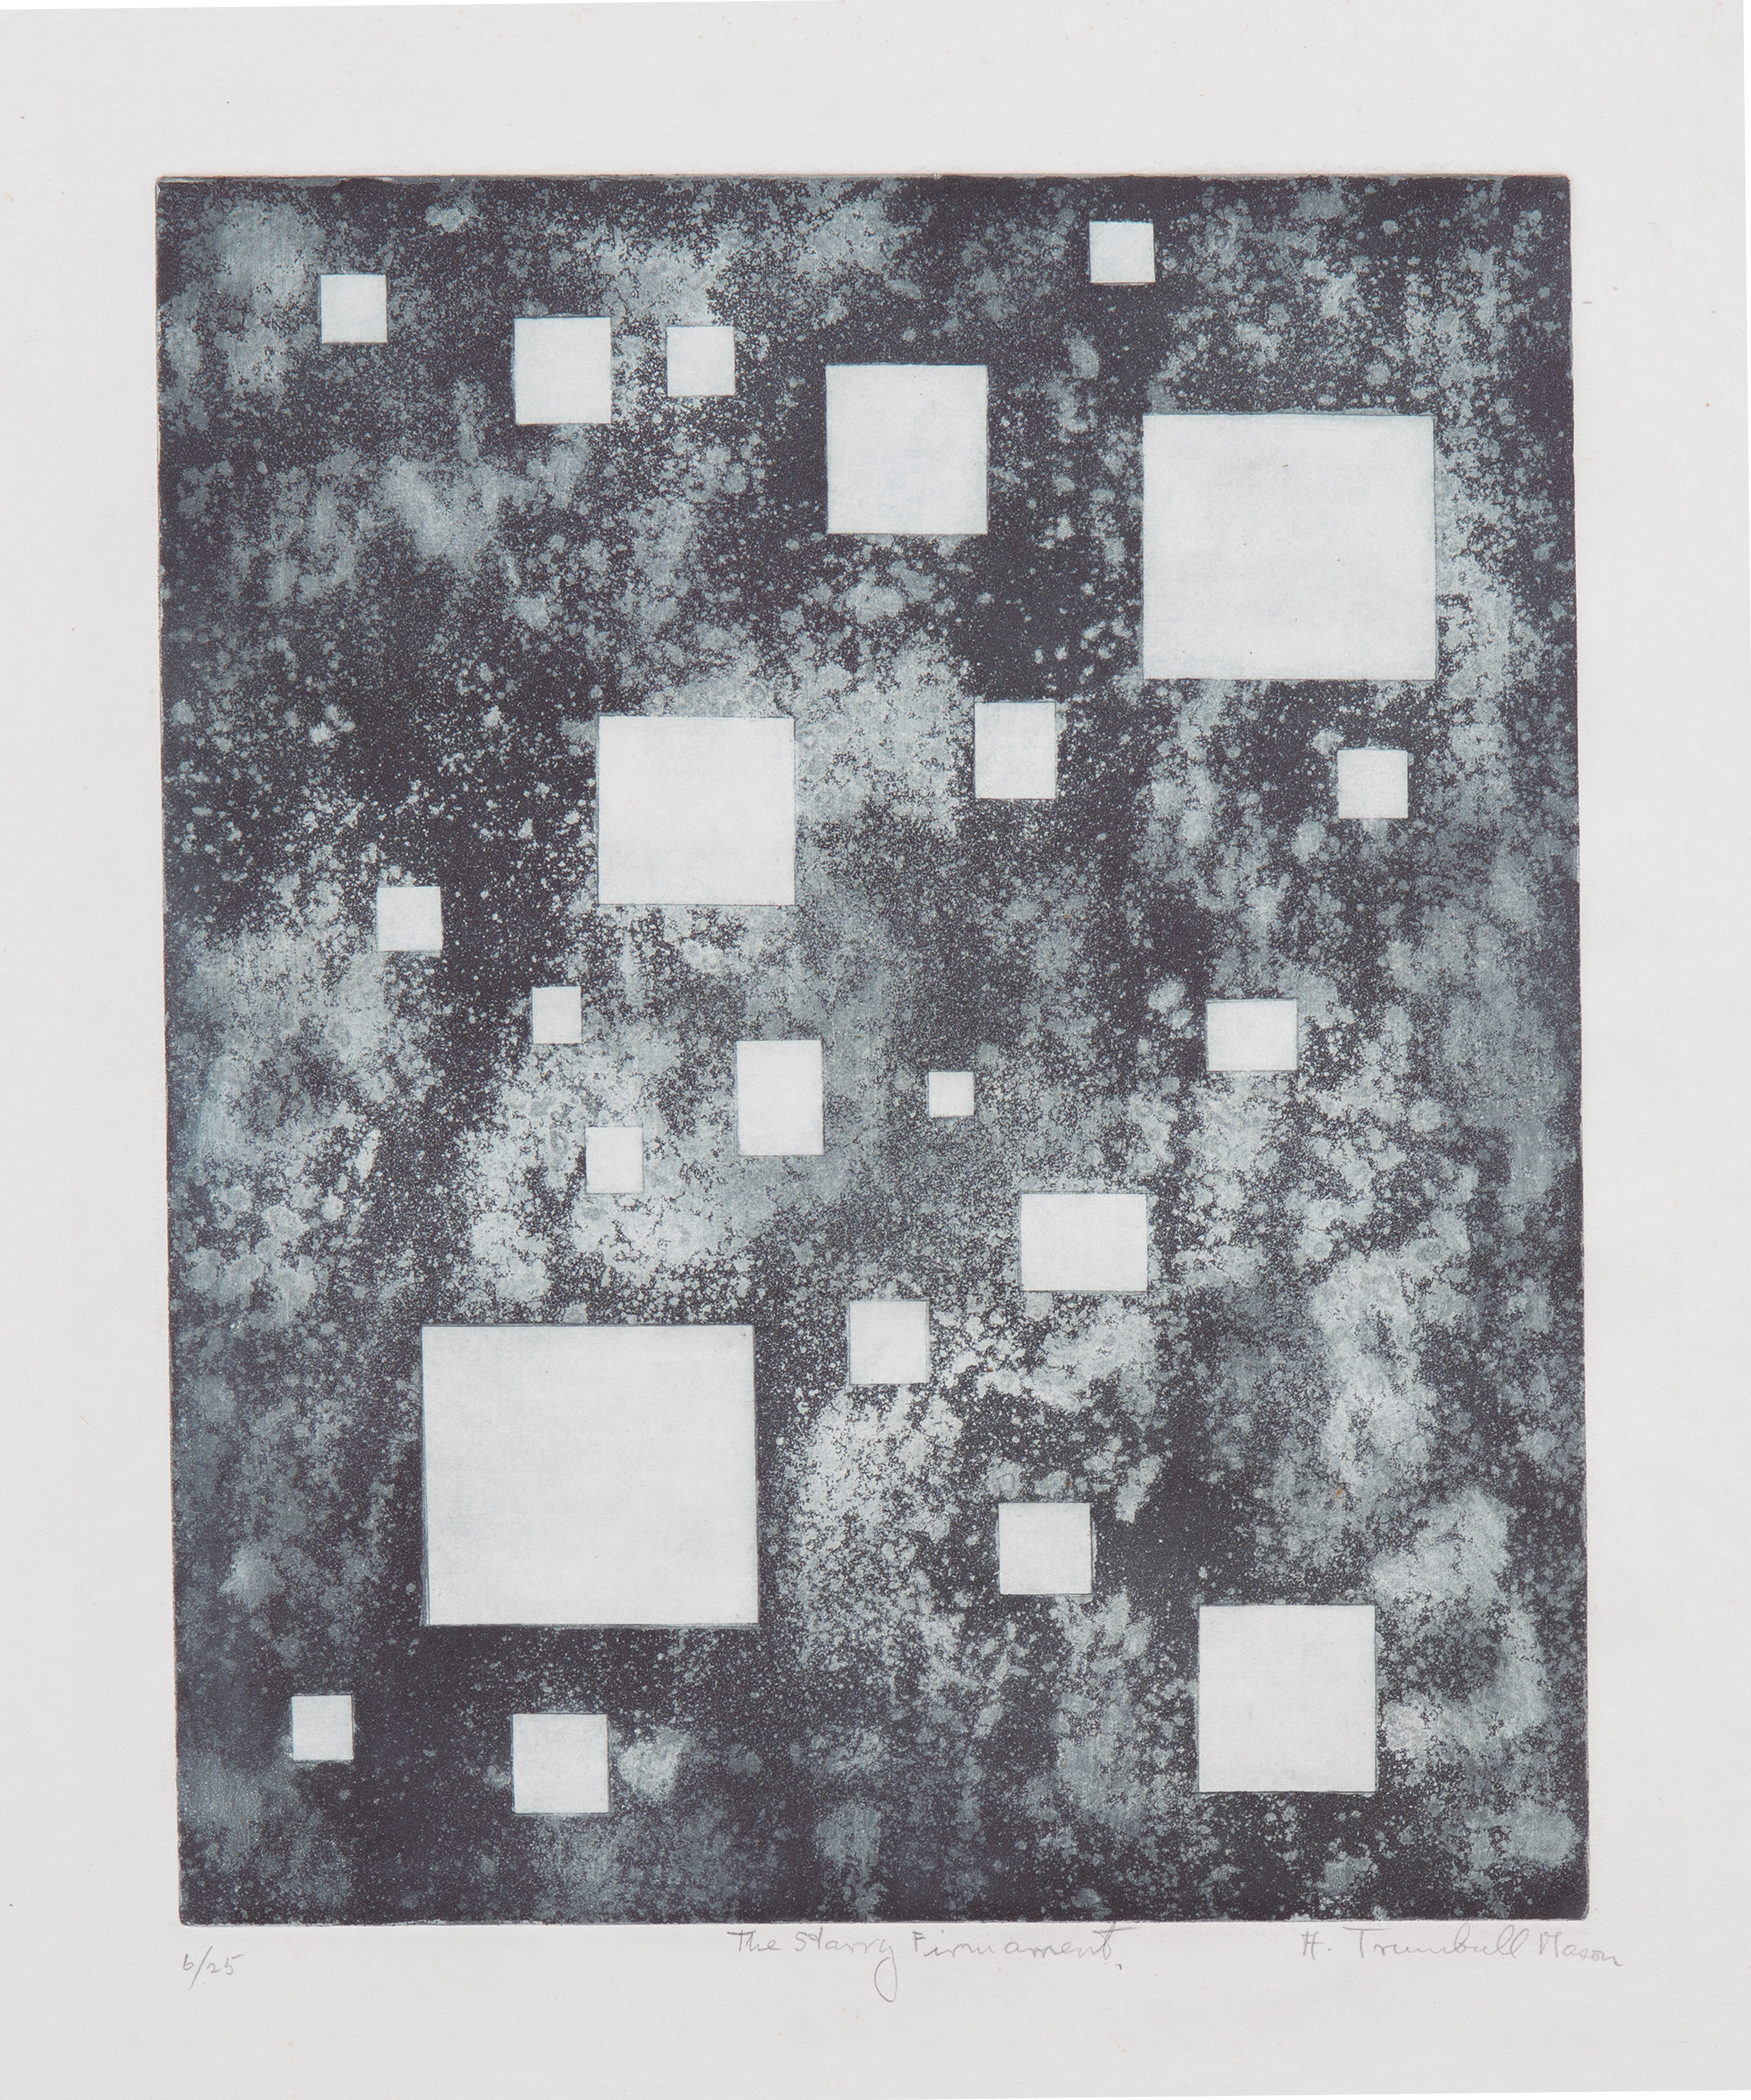 A black and white etching on paper comprised of constellation-like textures and intermittent, solid white squares of varying sizes.